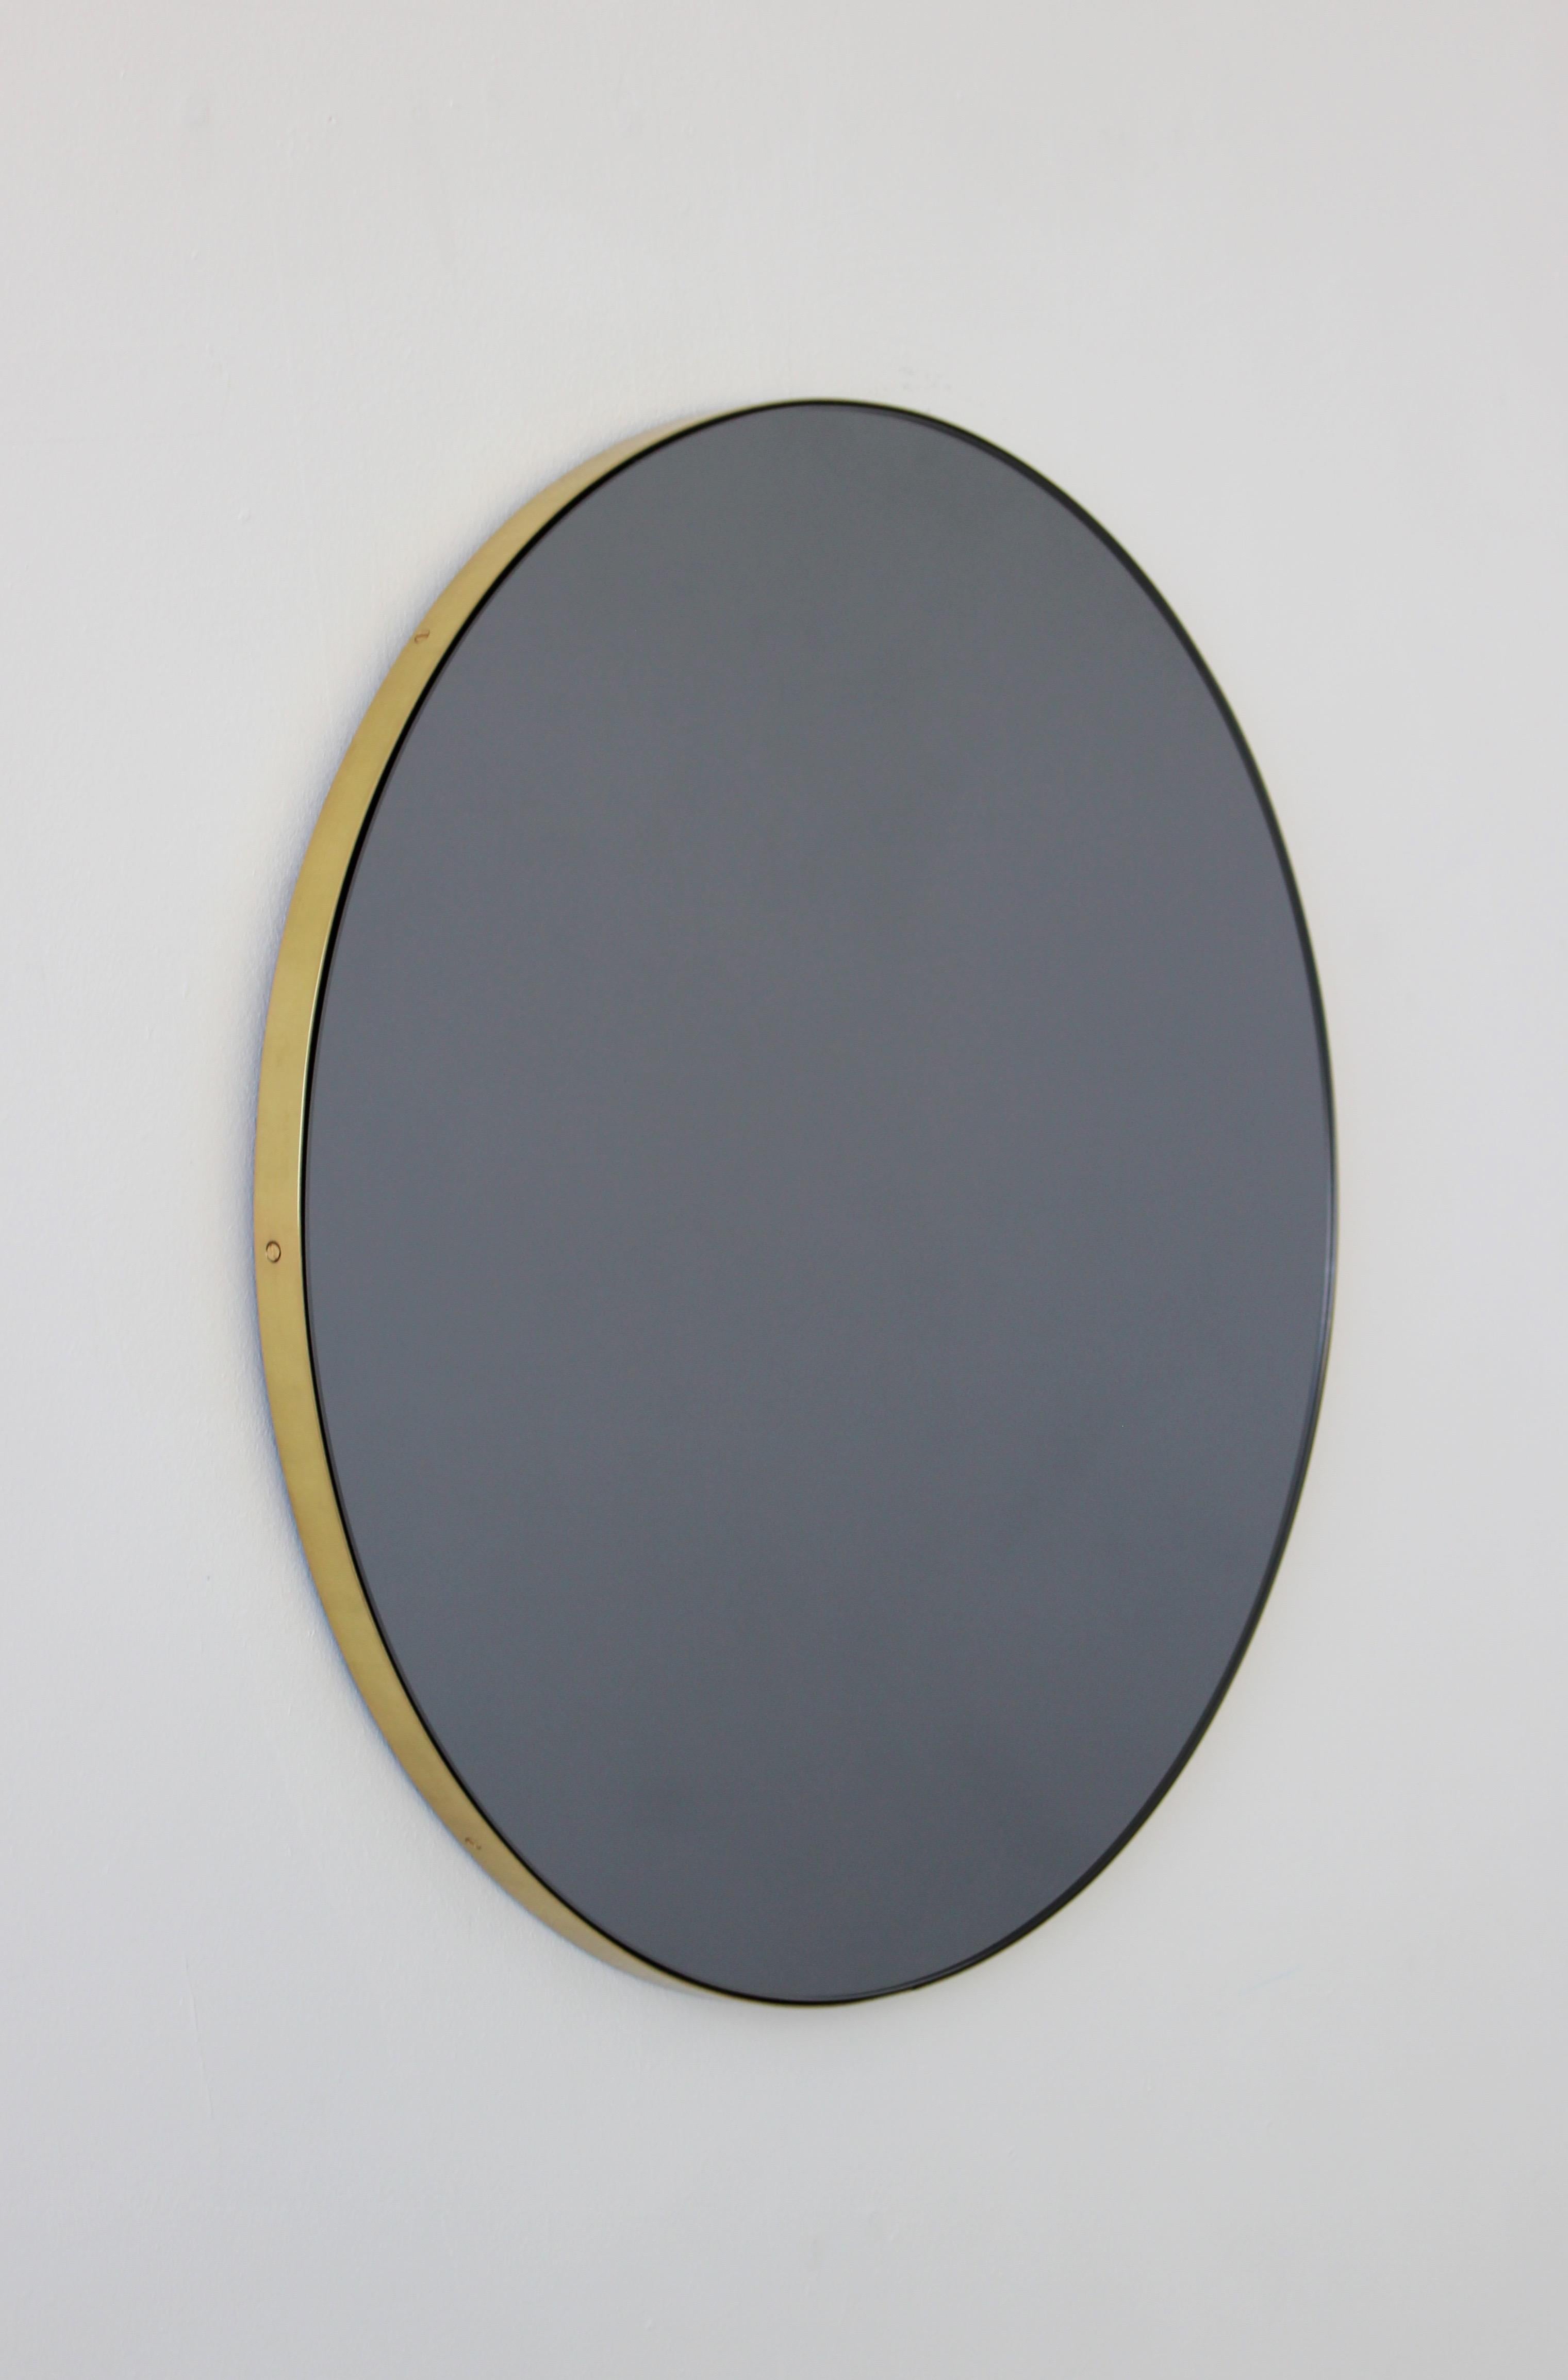 Orbis Black Tinted Round Contemporary Mirror with a Brass Frame, Medium For Sale 1